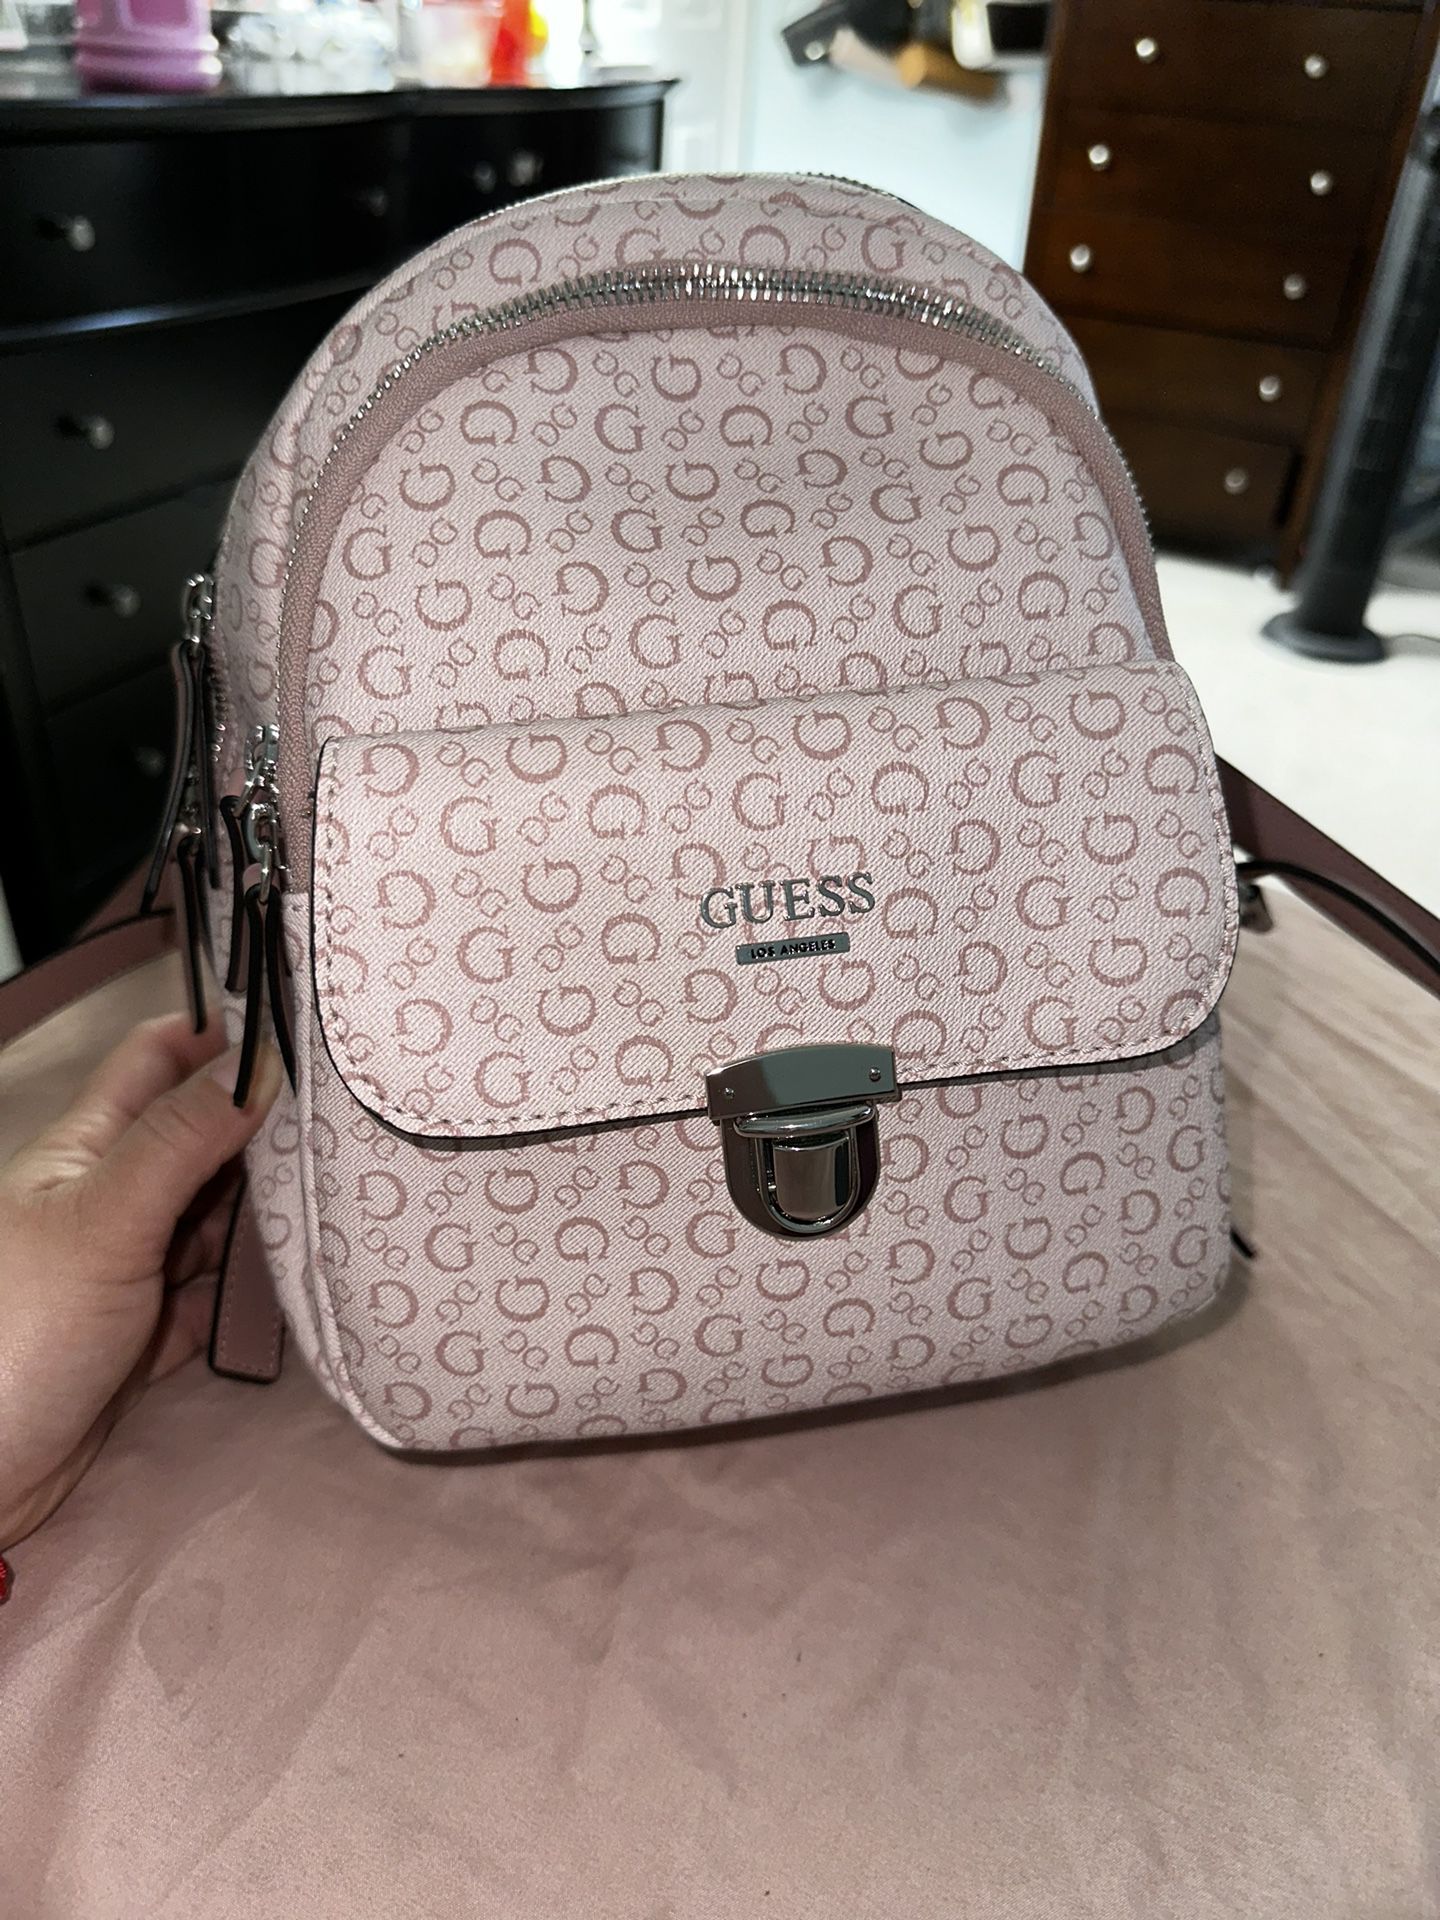 Backpack Guess